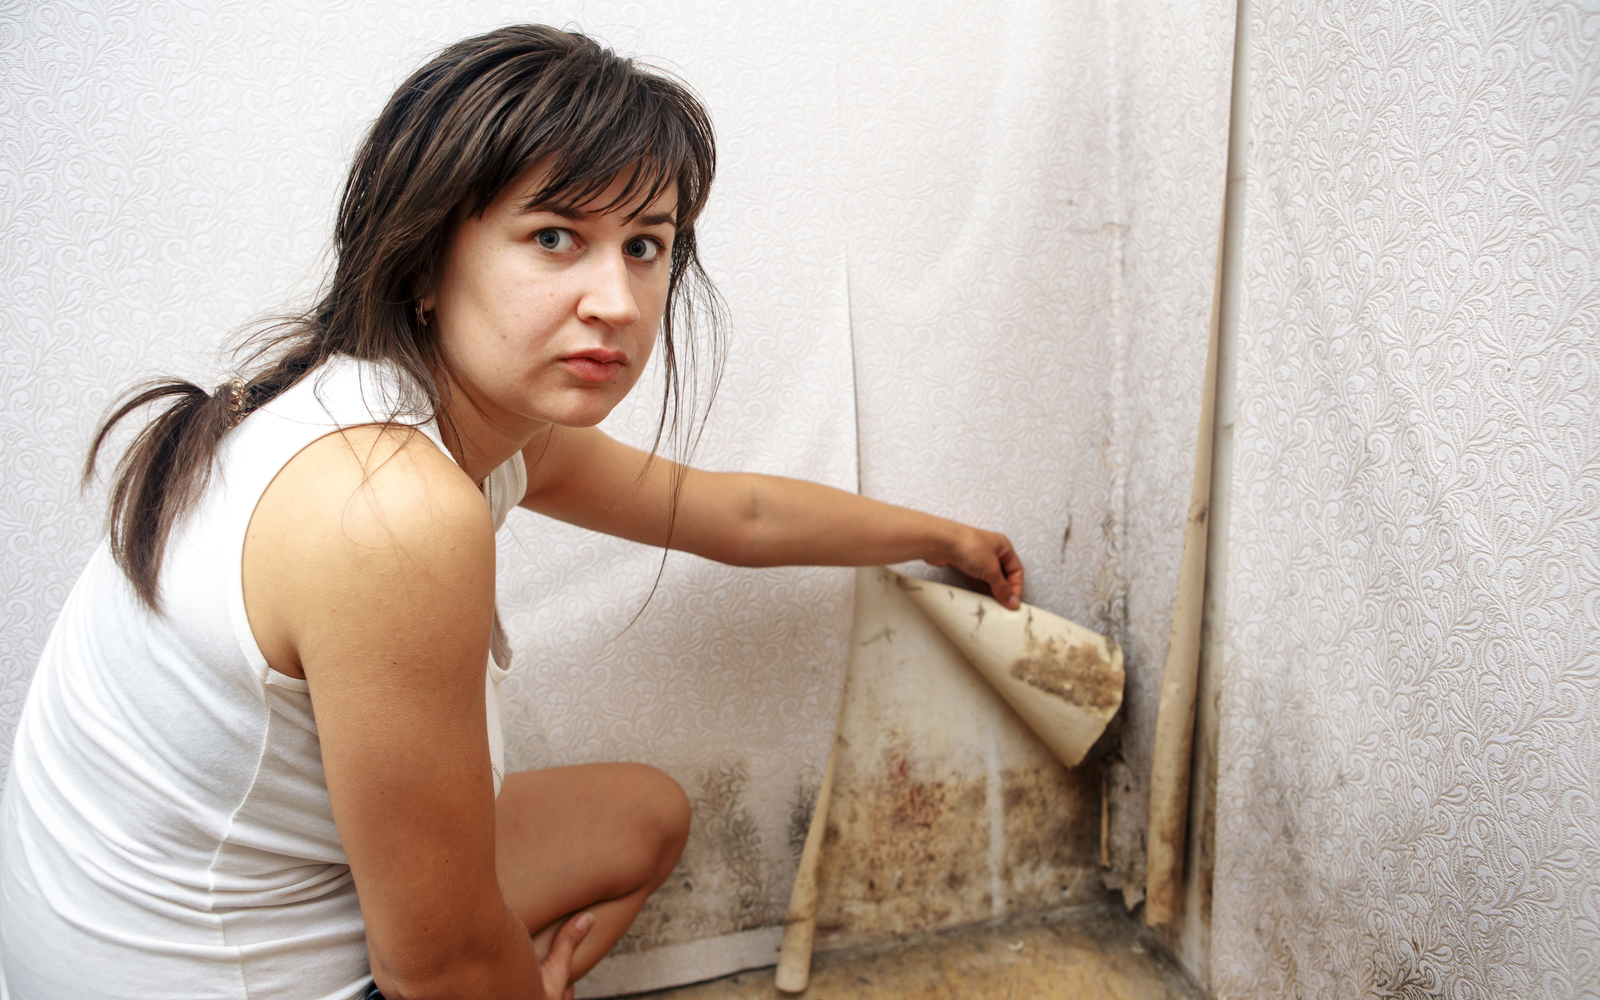 Woman pulling back wallpaper to reveal black mold